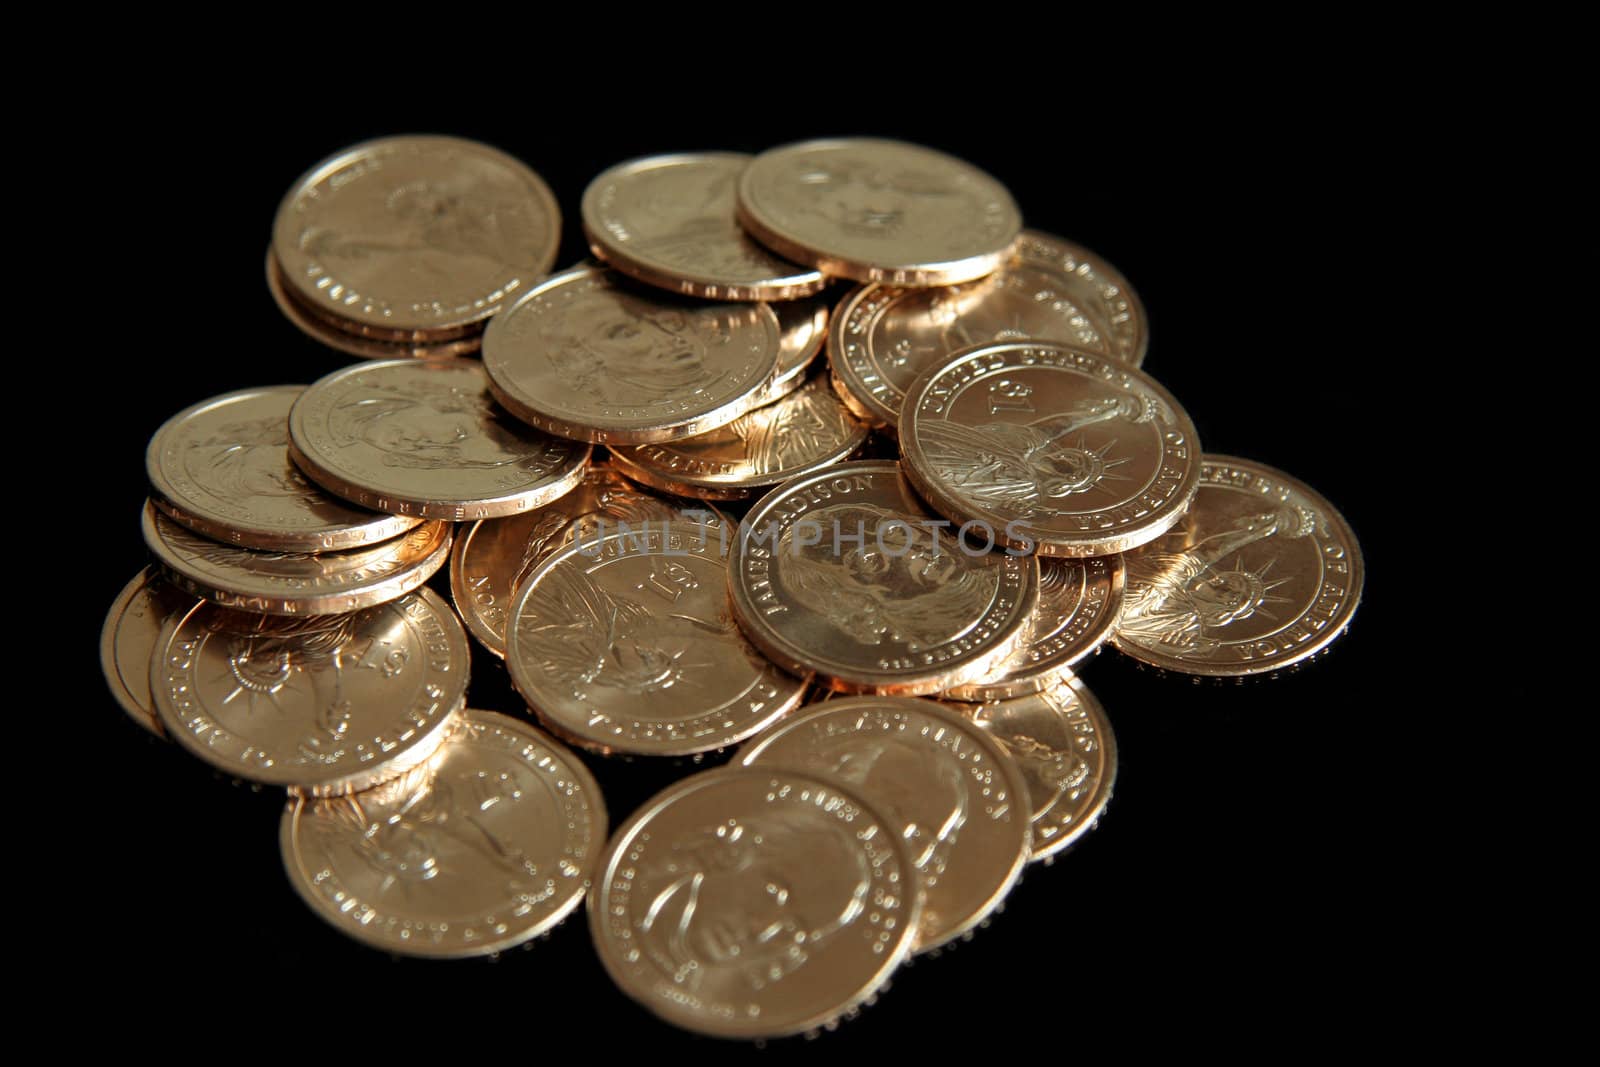 A single pile of gold U.S. one dollar coins